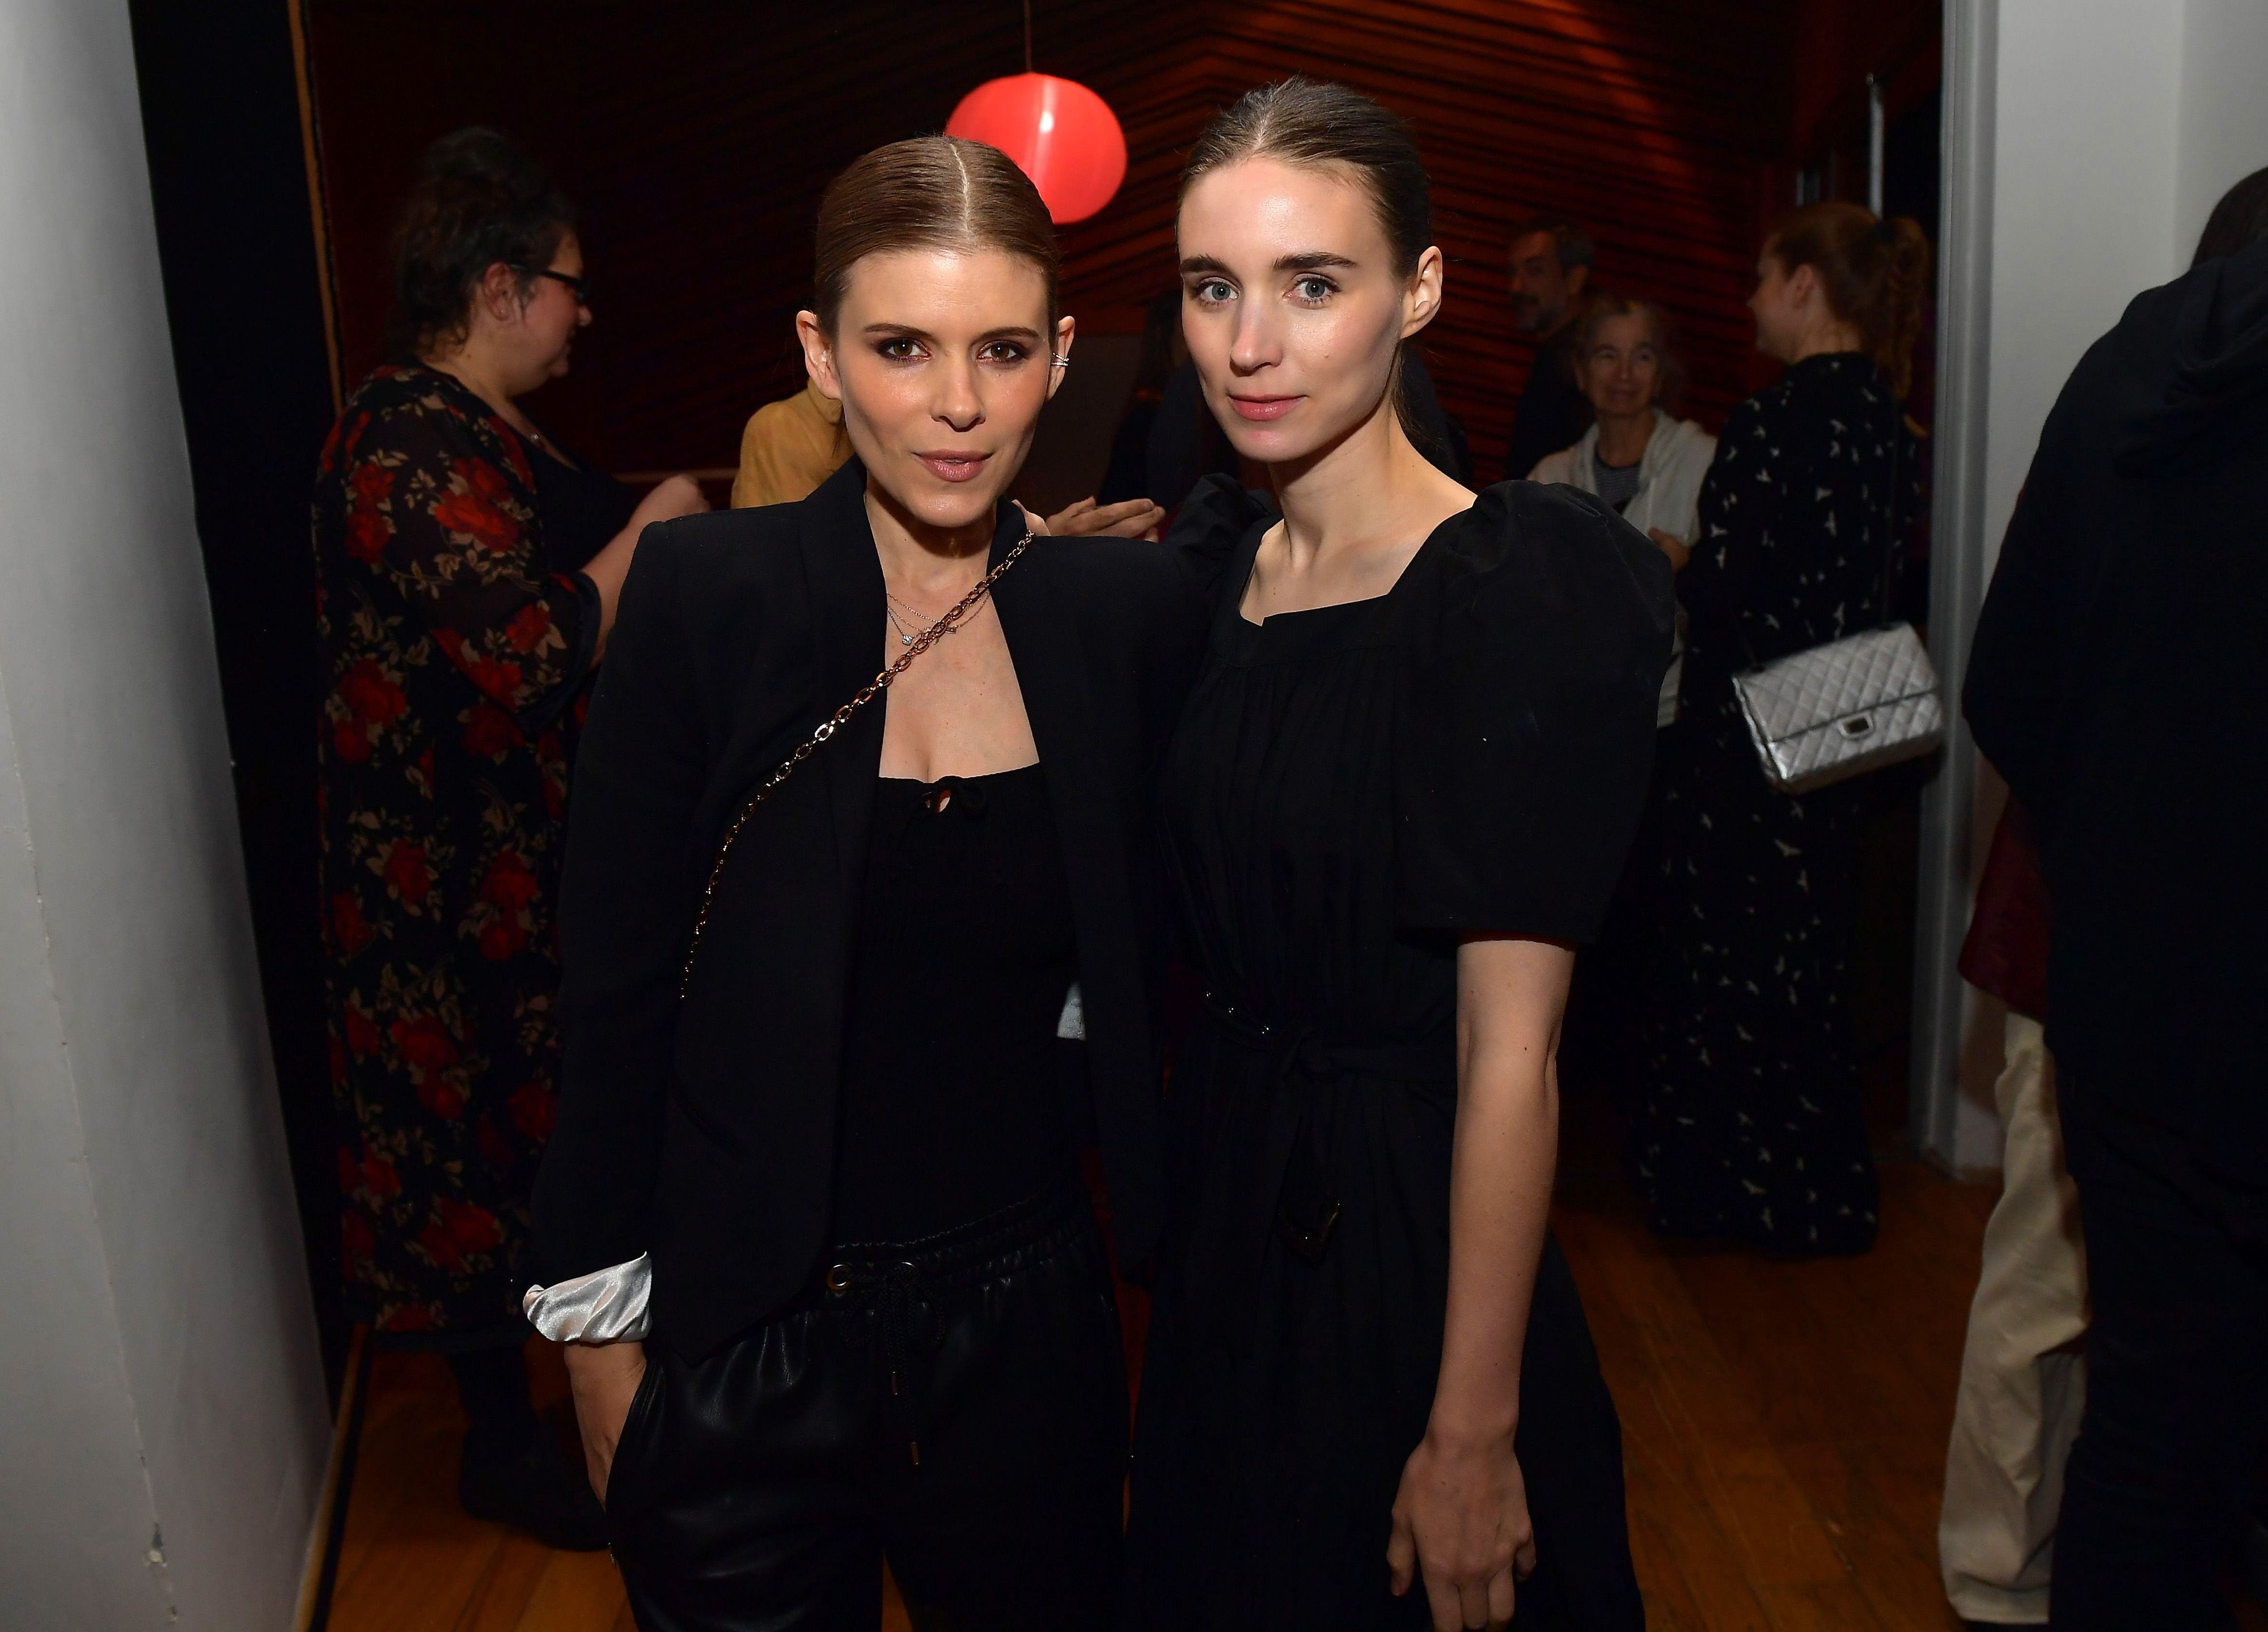 (L-R) Kate Mara and Rooney Mara attend the release party to celebrate Rain Phoenix's new album "RIVER", Jim Henson Studios on October 28, 2019, in Hollywood, California.| Source: Getty Images